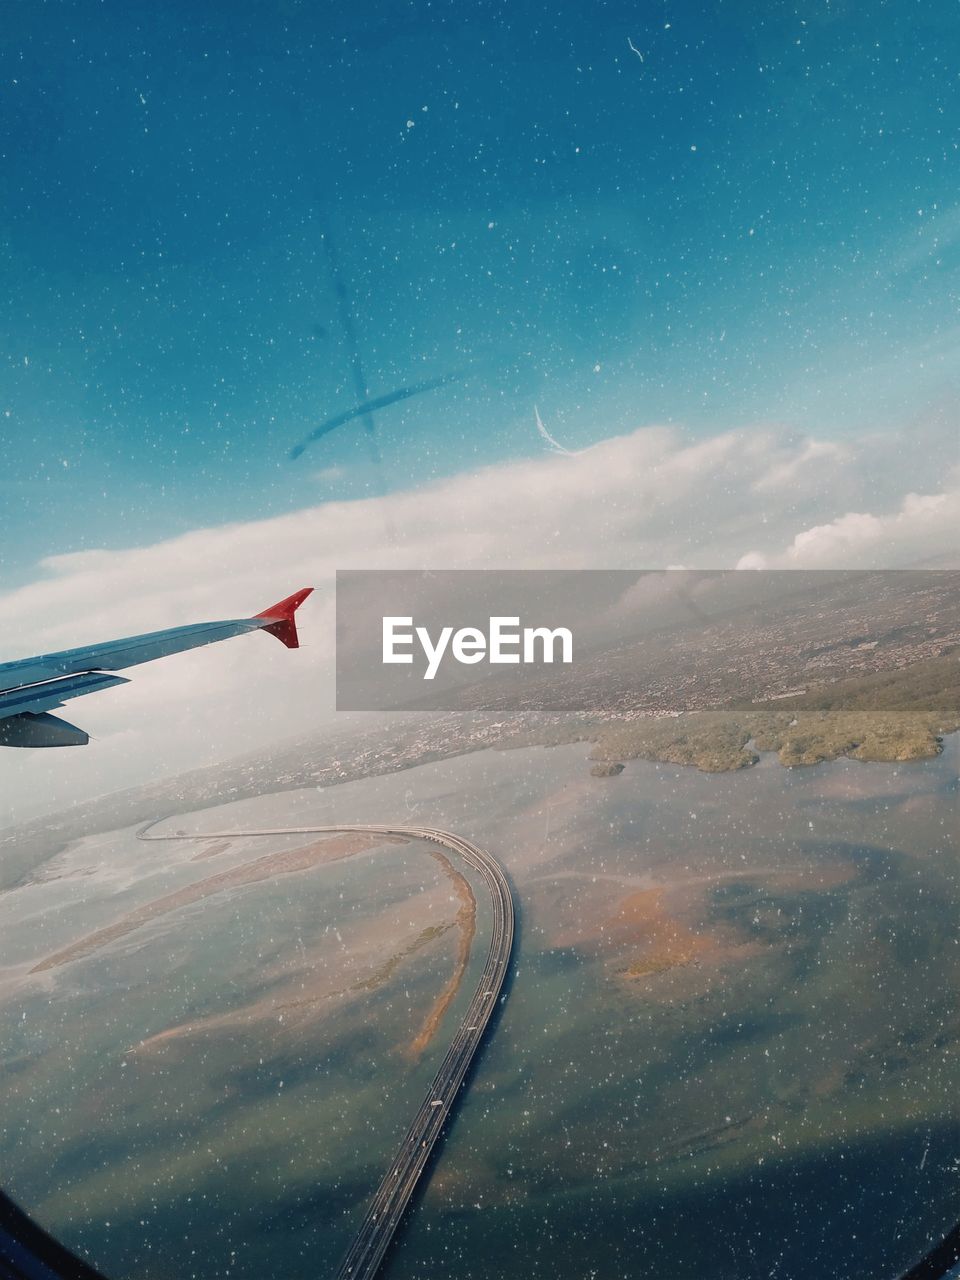 Airplane flying in sky seen through glass window